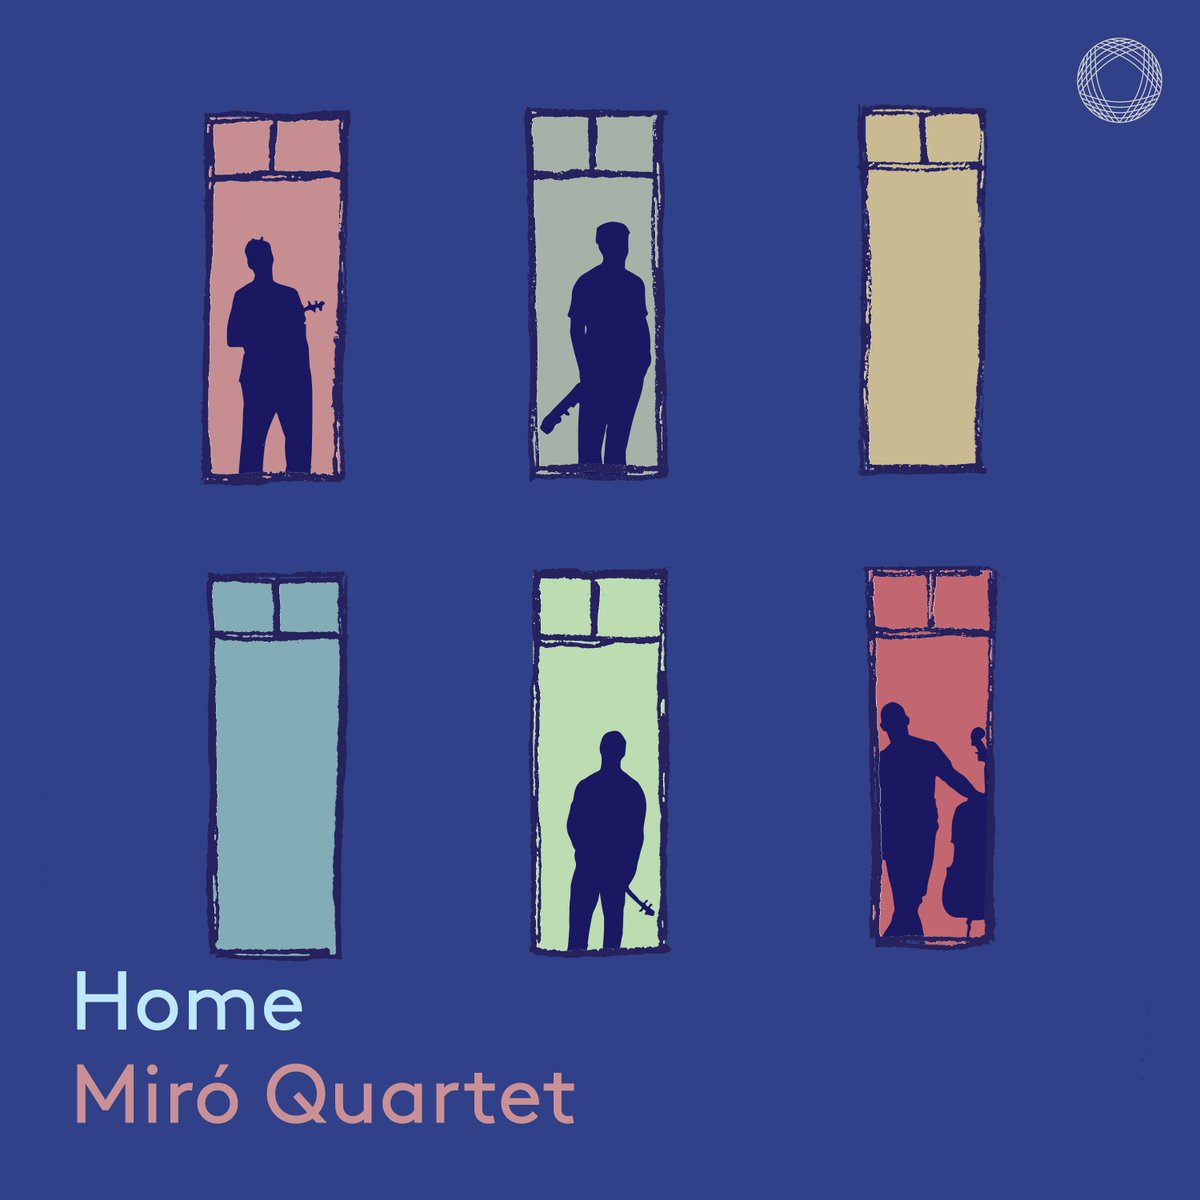 The @miroquartet presents ‘Home’, a new album that explores the many concepts of what the term “home” can mean. #comingsoon